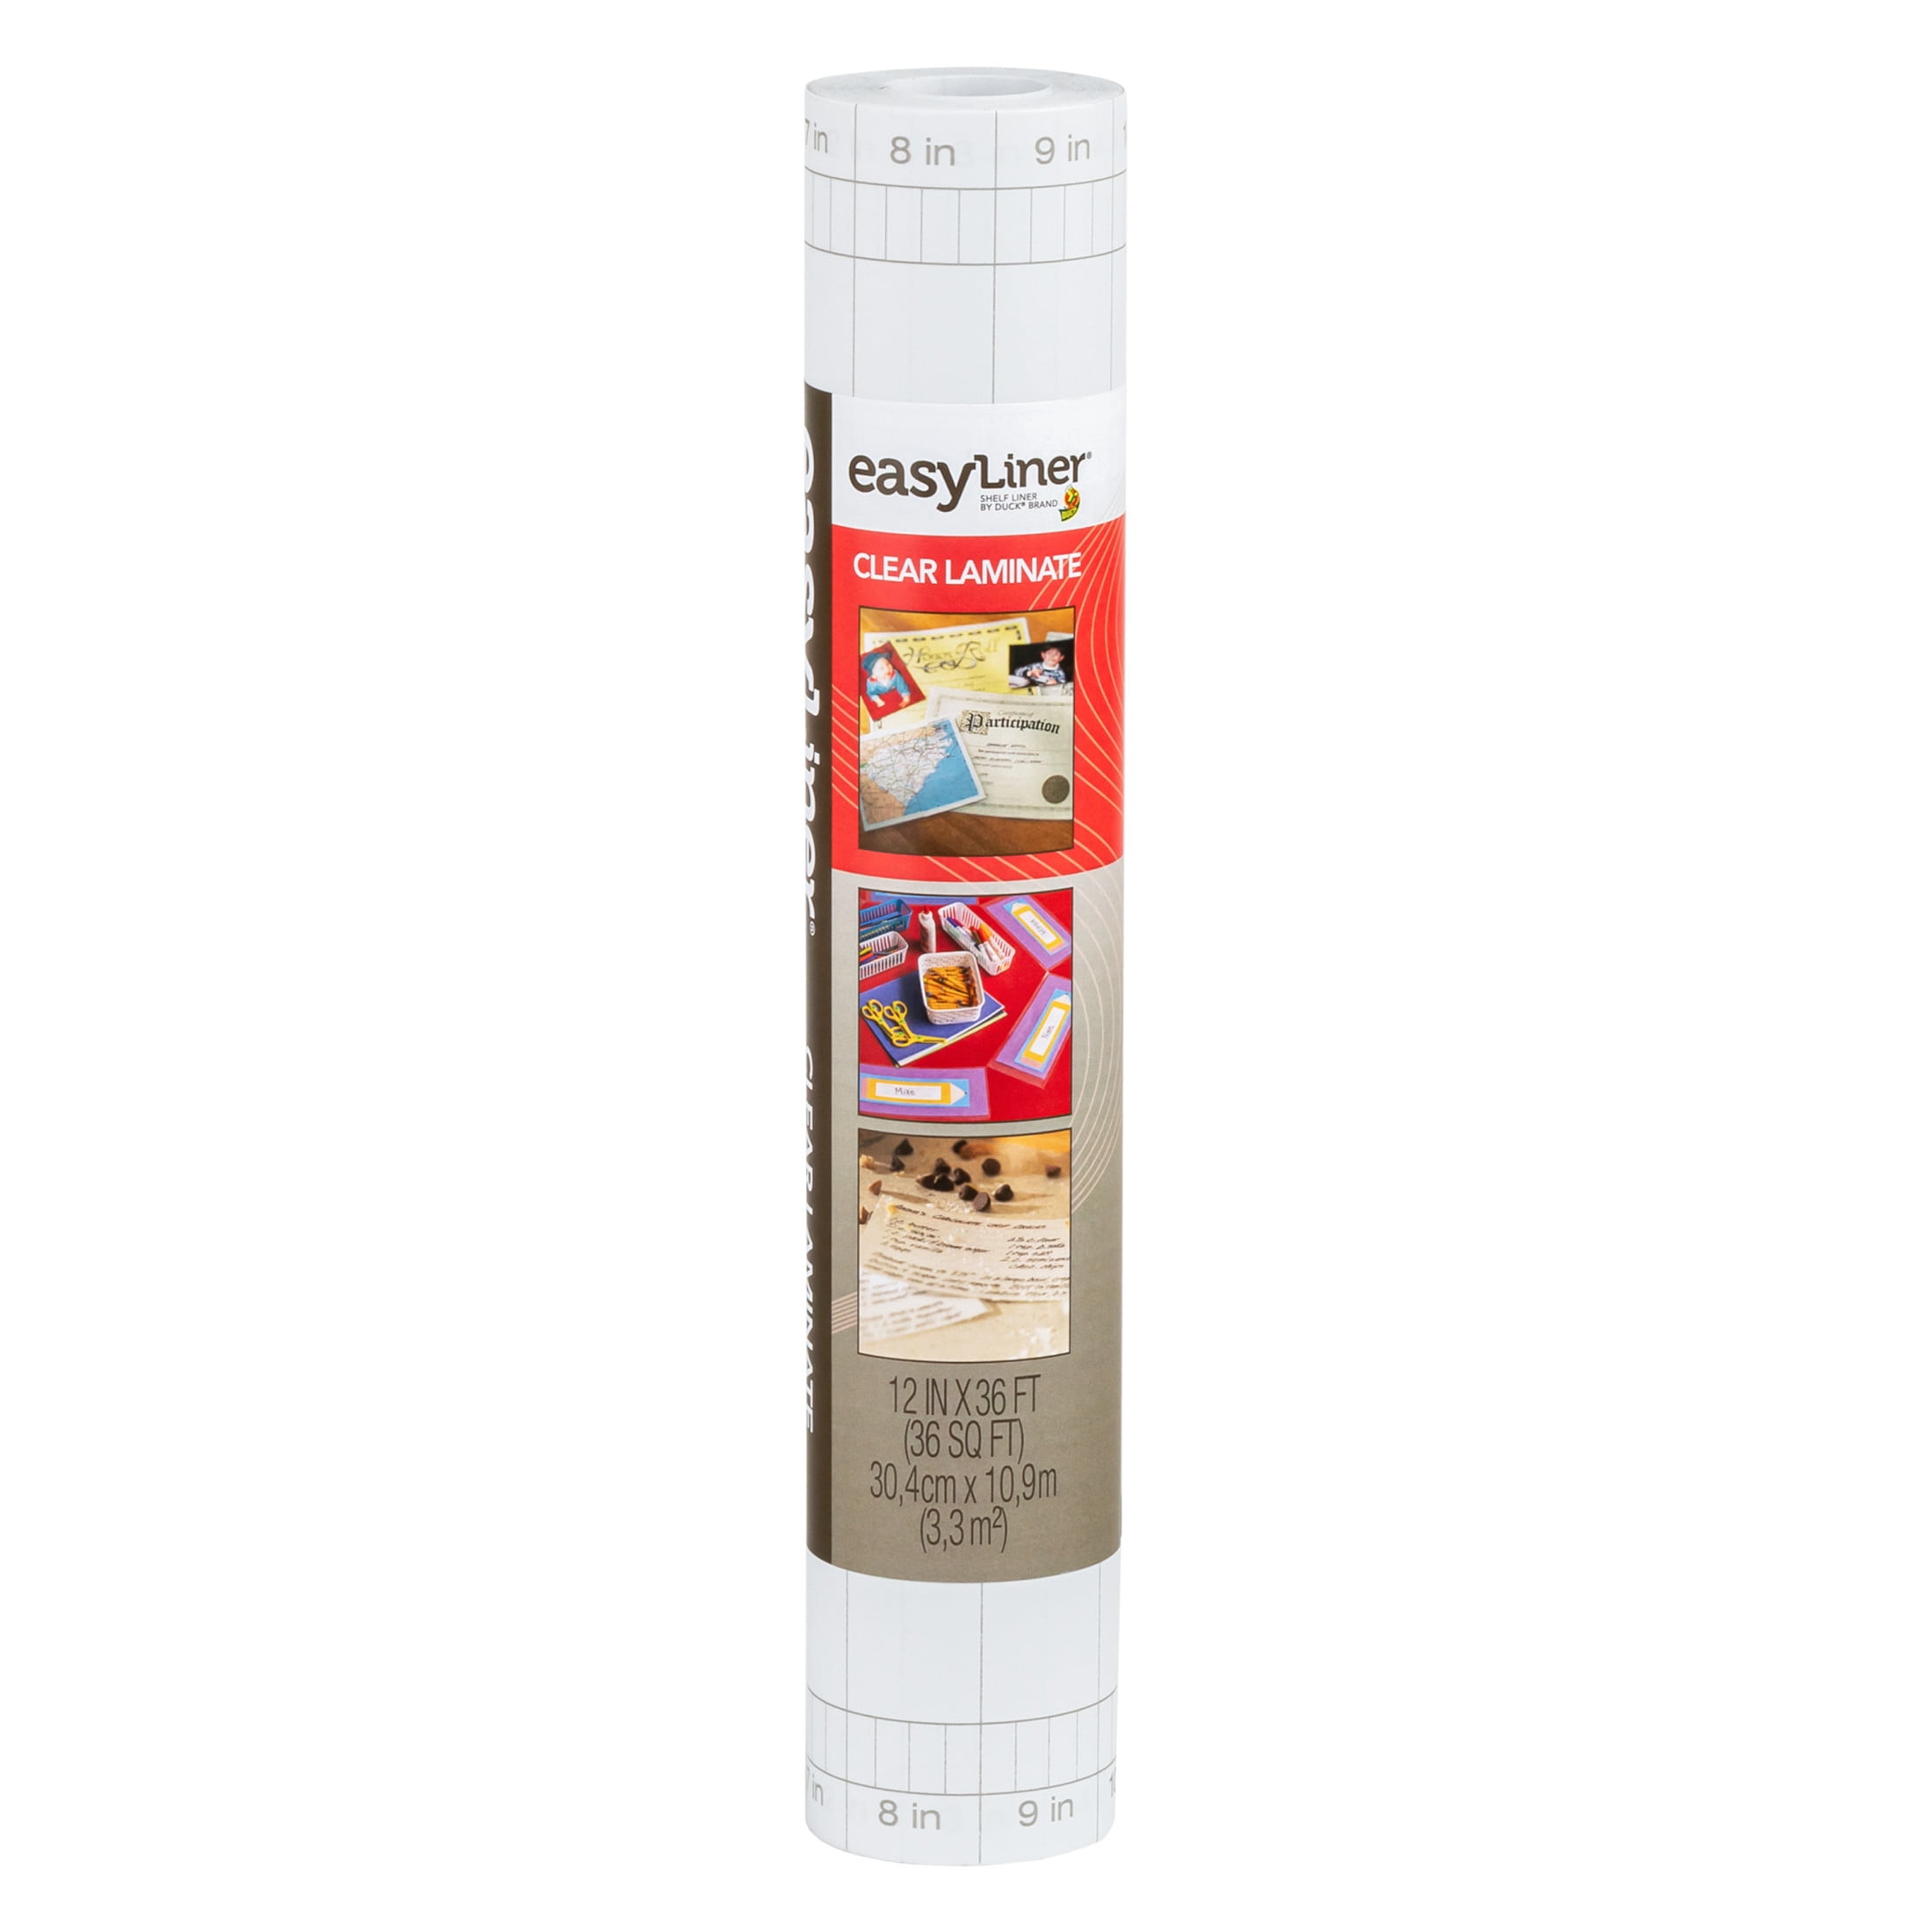 Duck EasyLiner Adhesive Clear Laminate 20-in x 30-ft Clear Shelf